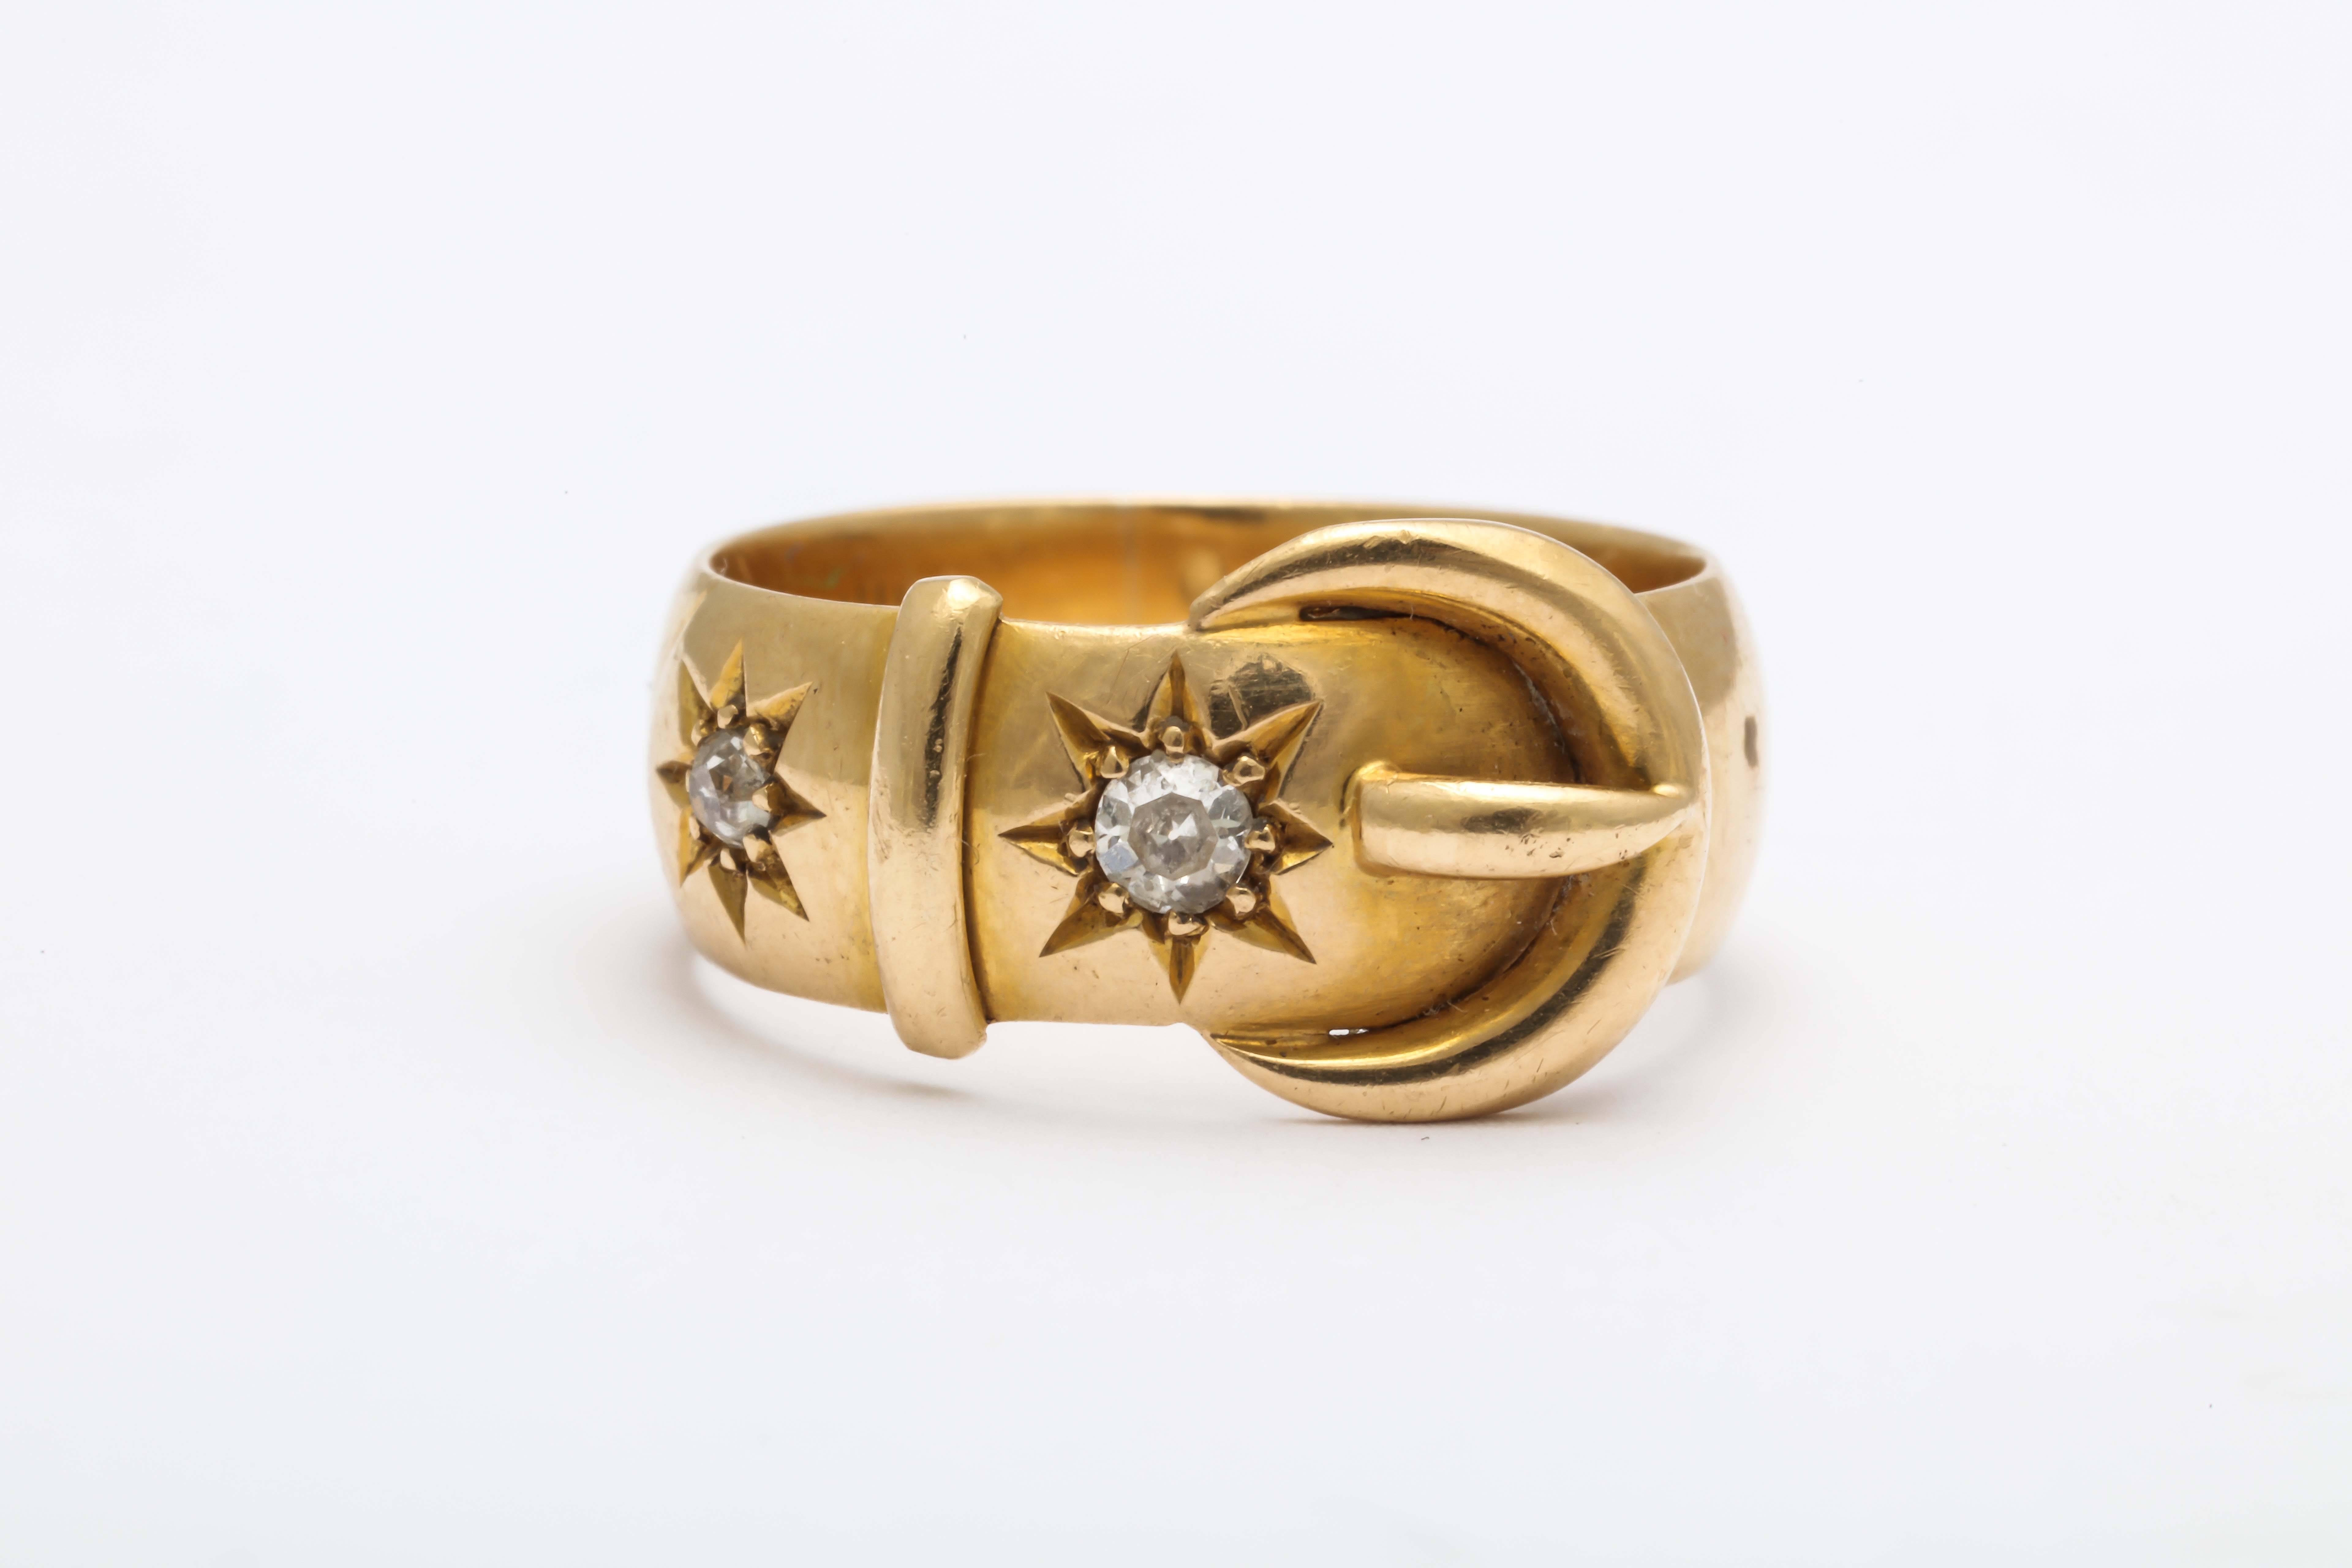 The love of Victorian jewelry and its most popular motifs continued well on into the 20th c. This ring, made in Chester, England c.1915 is 18kt. Two Old European cut diamonds weighing approximately .05 and .03cts are set in 8 pointed star settings.